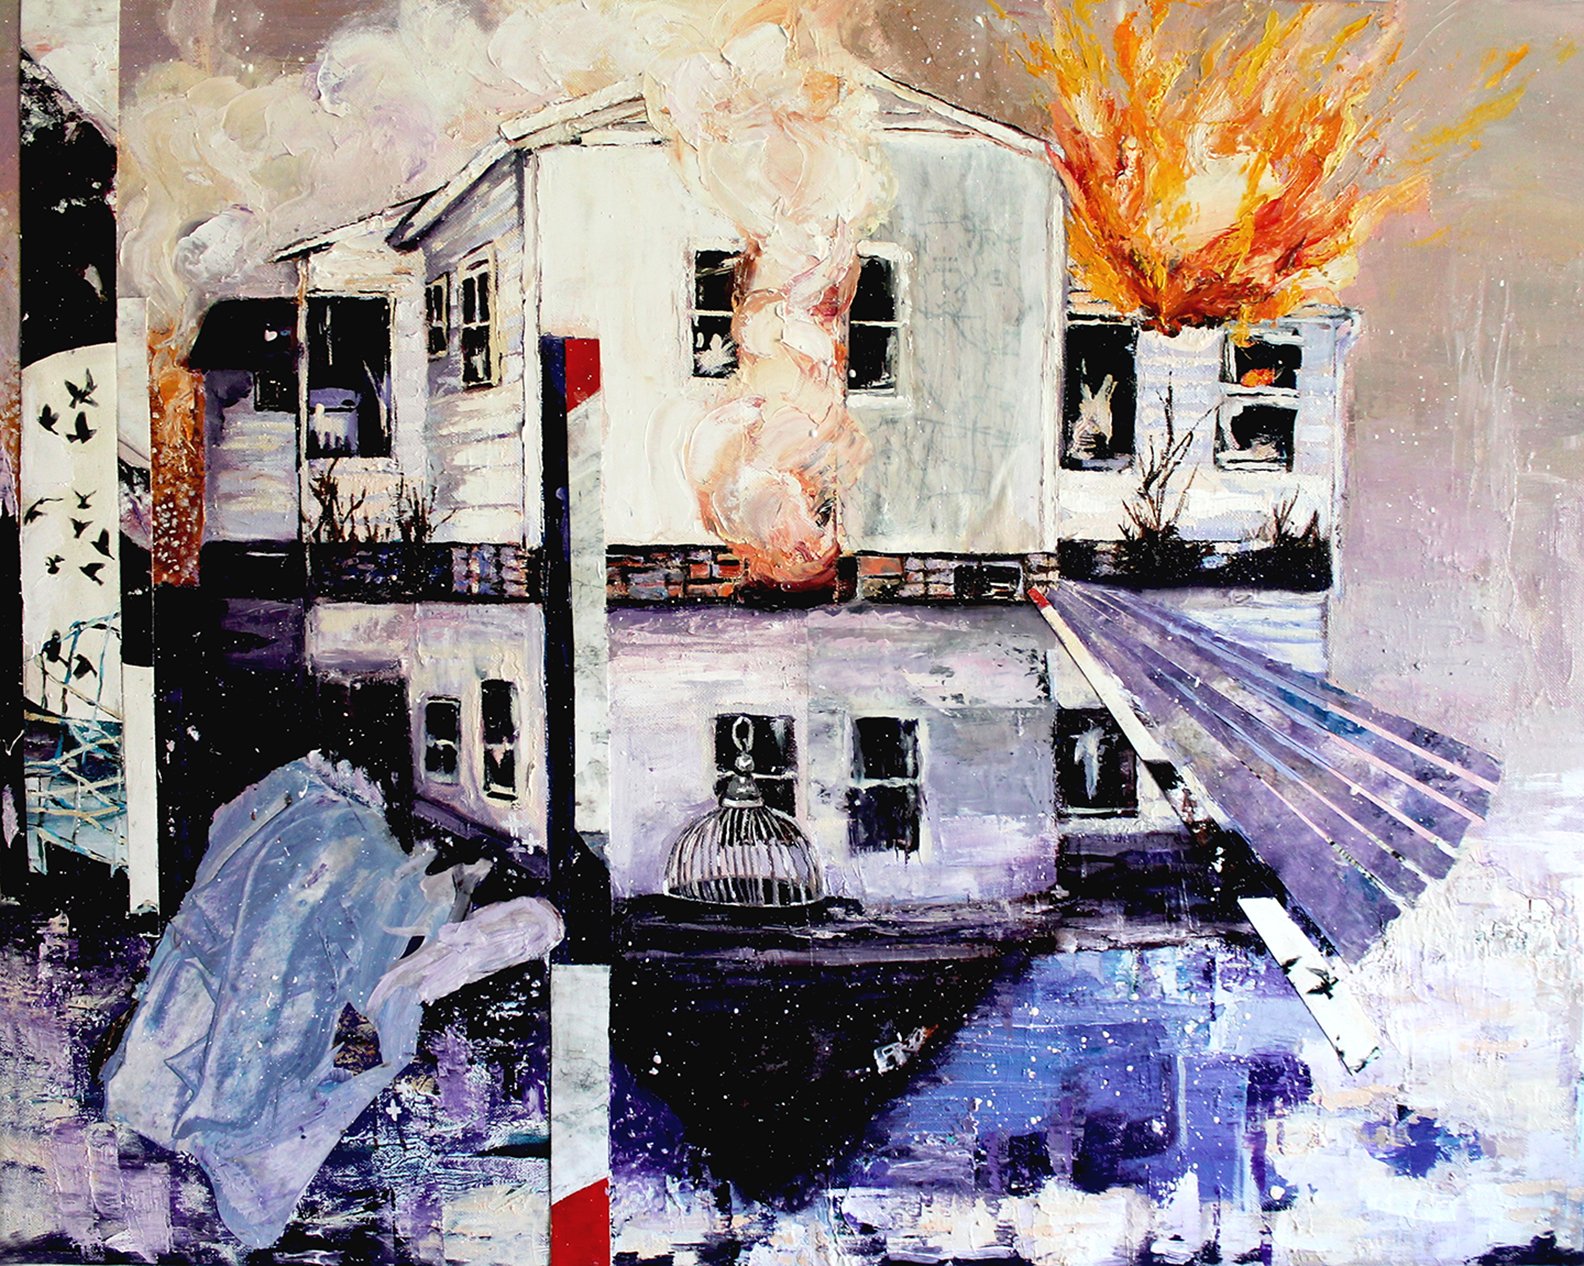 Michelle Rahbar, "The Year of the Flood"; Oil and mixed media on canvas; 30" x 24"